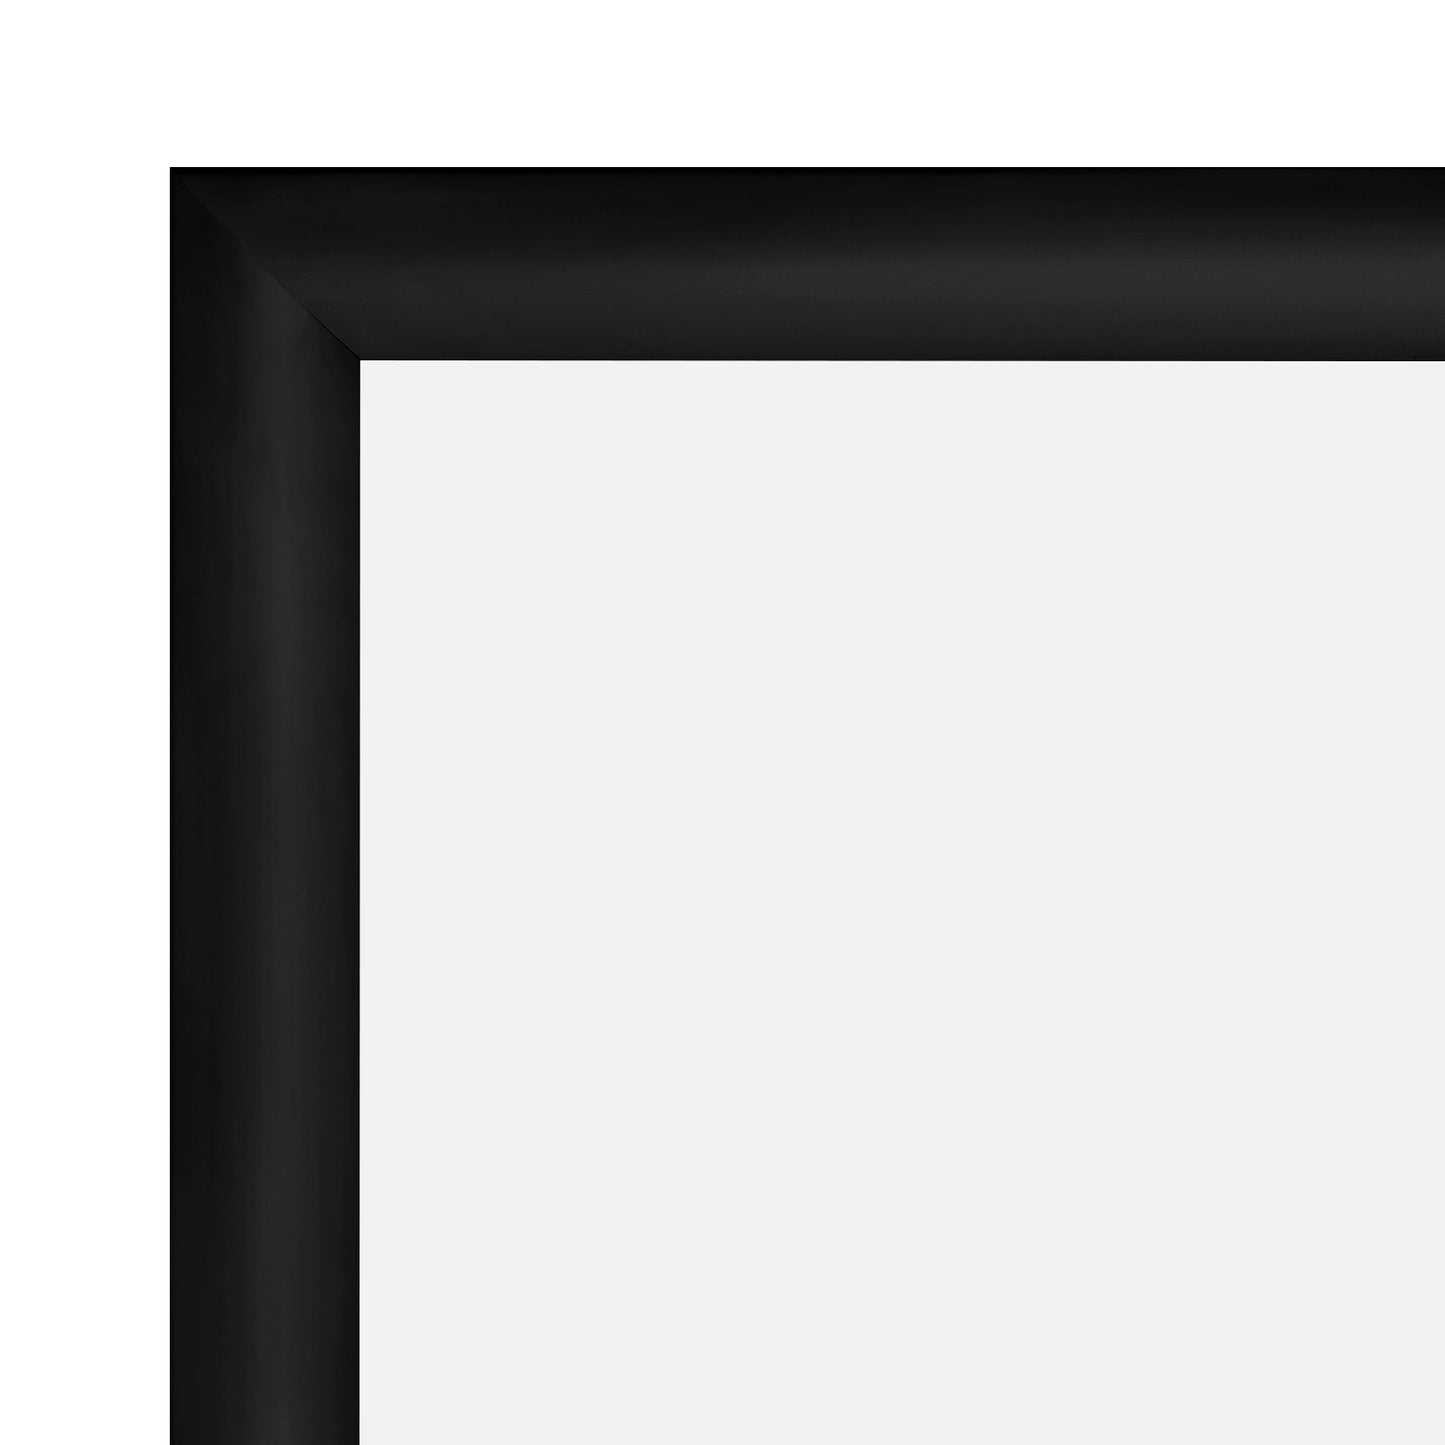 Load image into Gallery viewer, 24x32 Black SnapeZo® Snap Frame - 1.2&amp;quot; Profile
